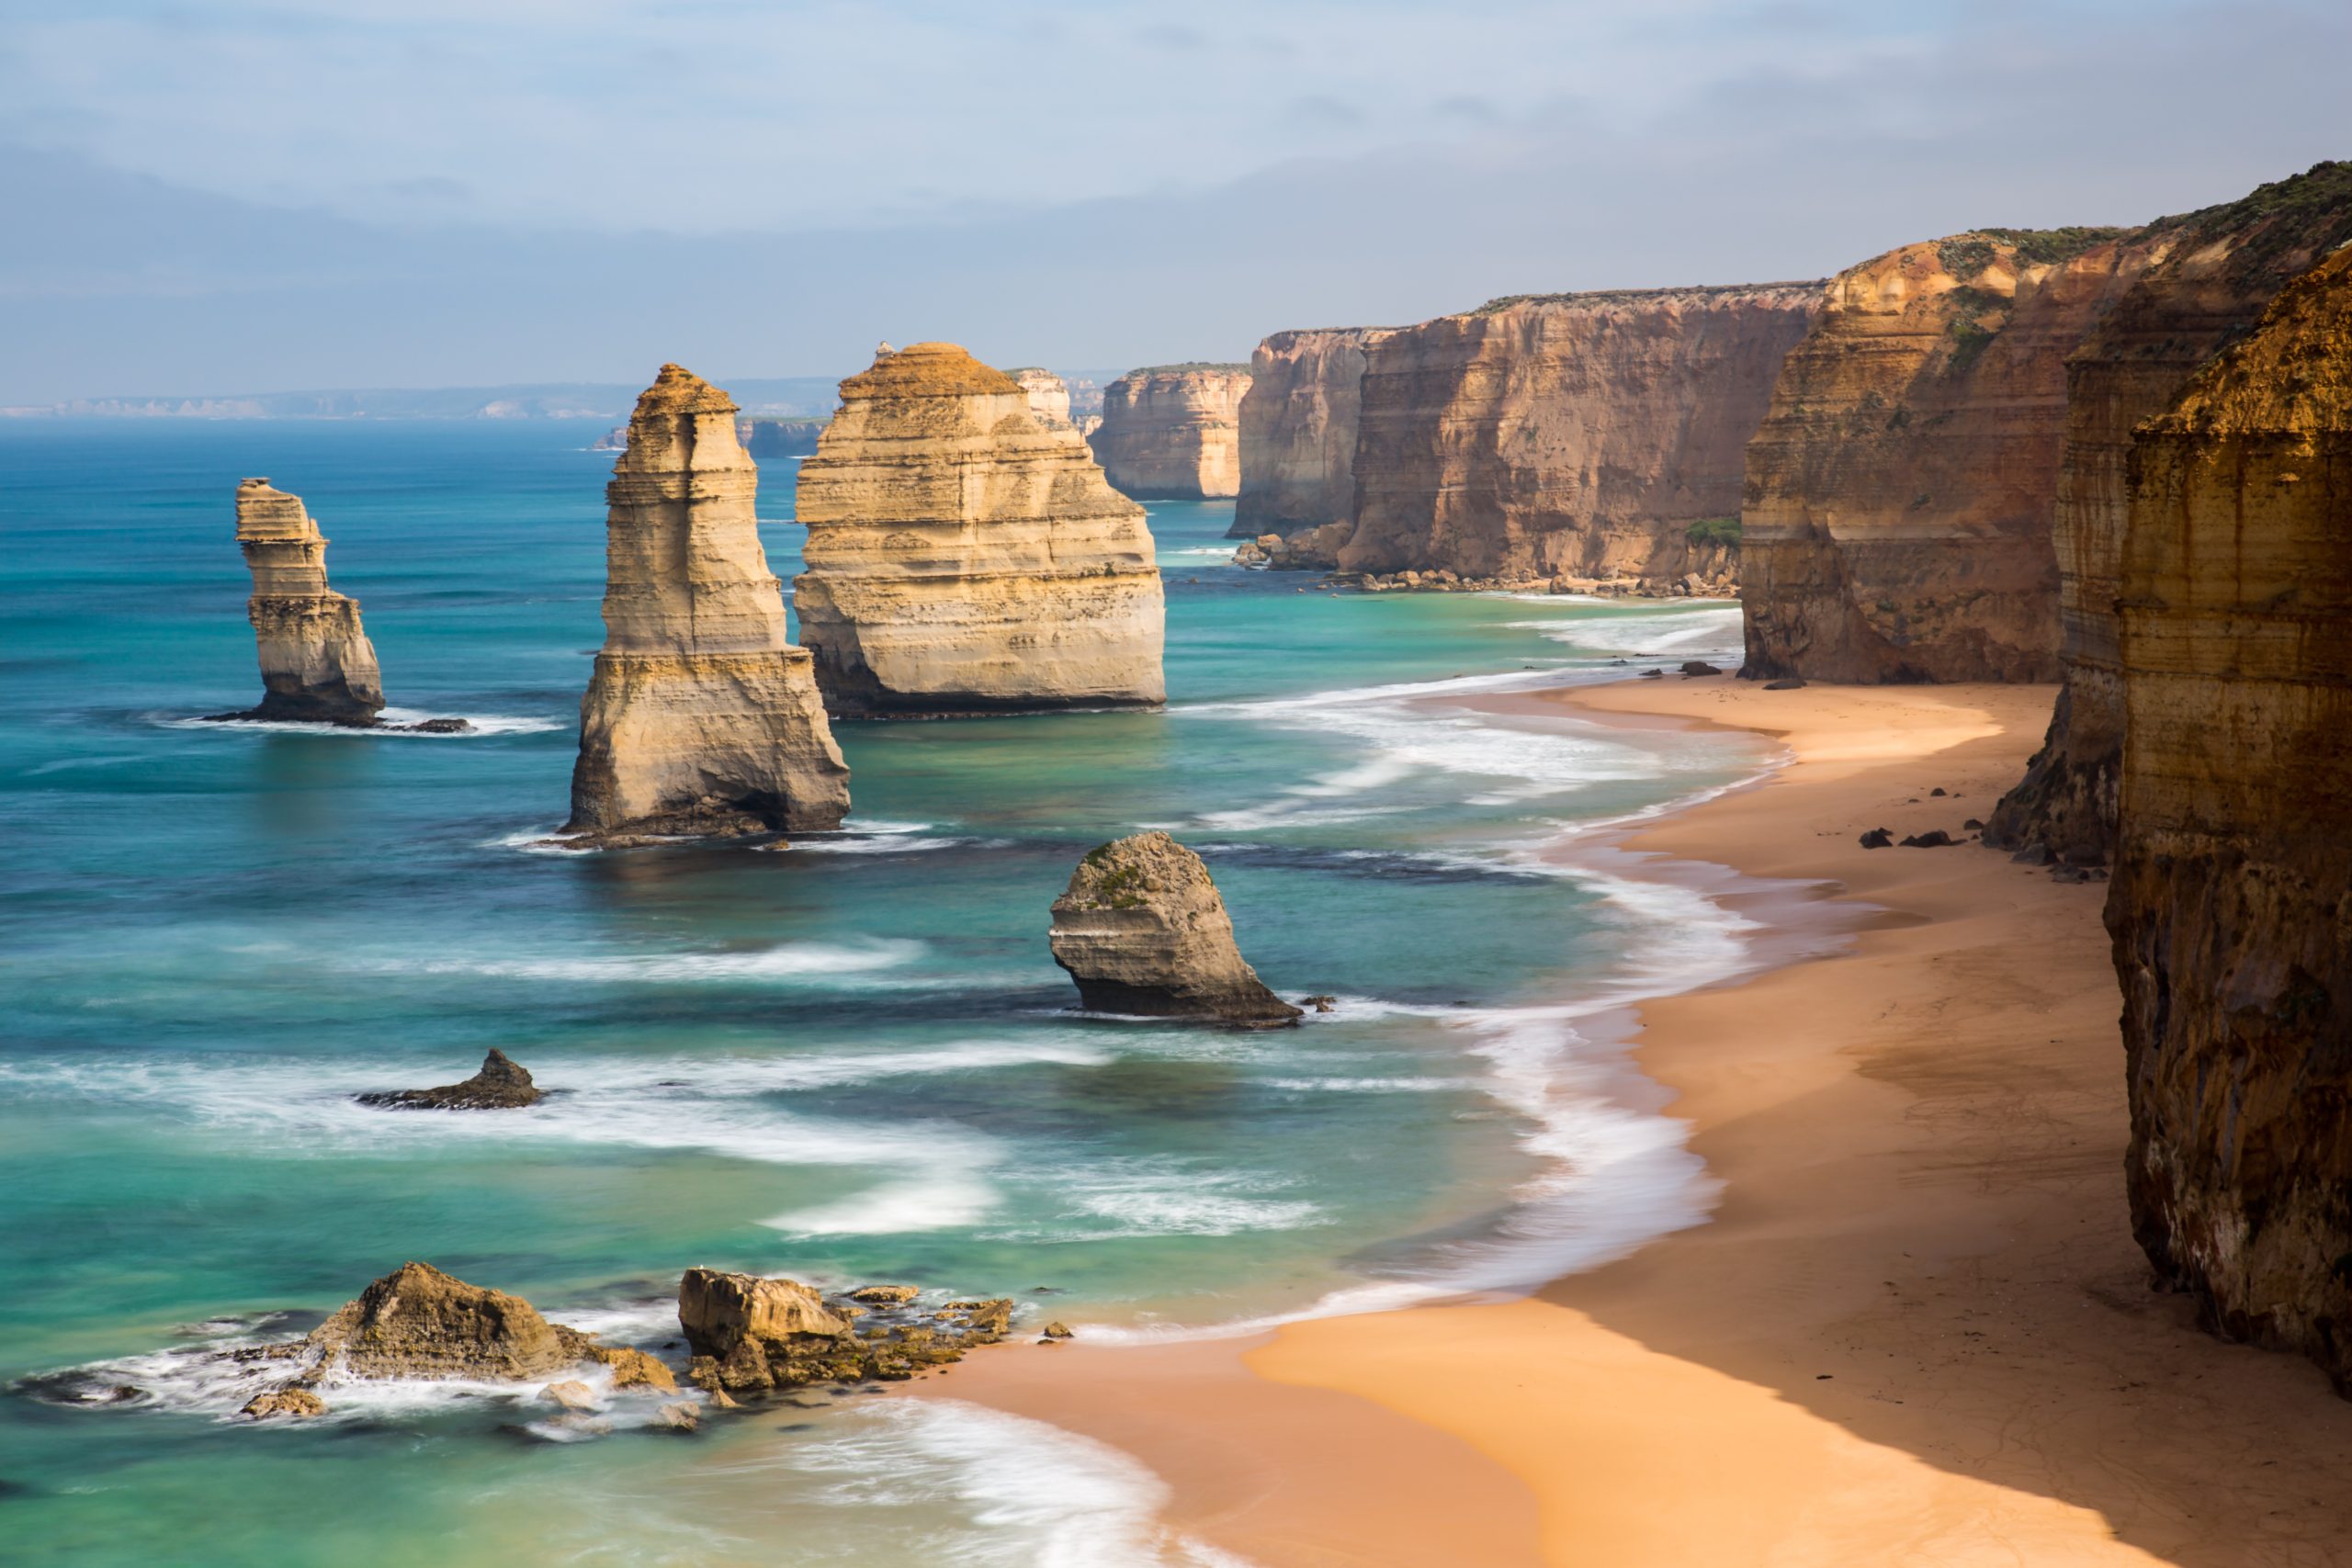 The 12 Apostles, located in Port Campbell National Park, Victoria, Australia. Right along Great Ocean Road!